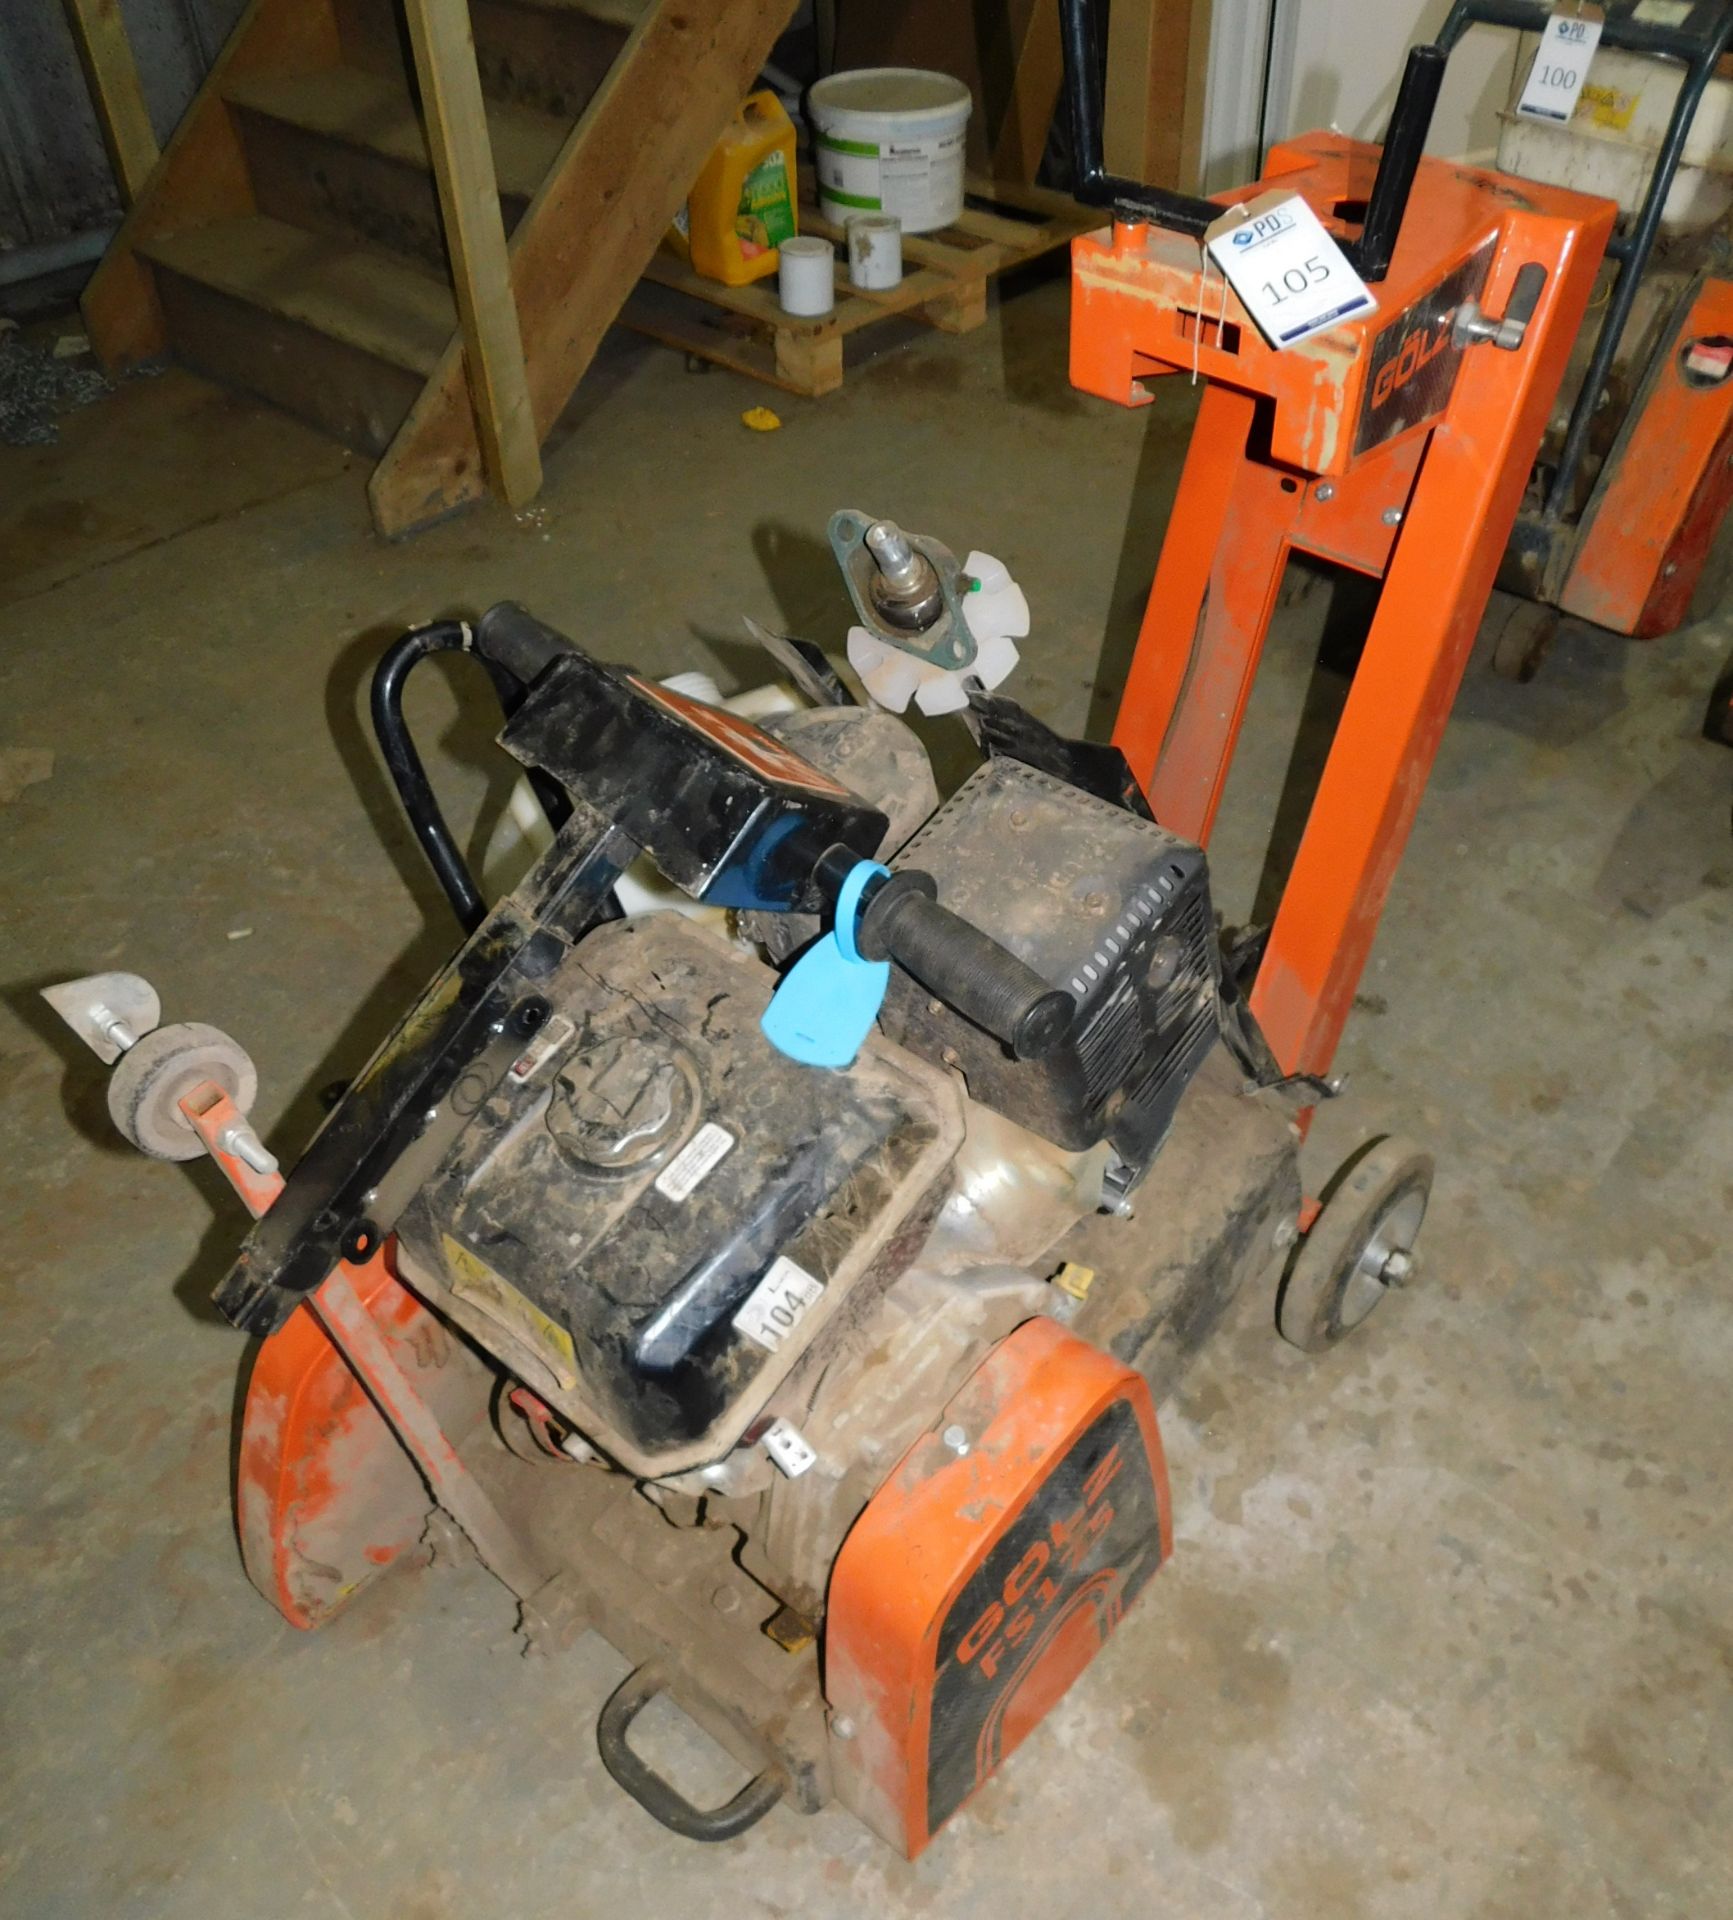 Golz F5175 Floor Saw with Petrol Engine (For Spares/Repair) (Location: March, Cambridge. Please - Image 3 of 3